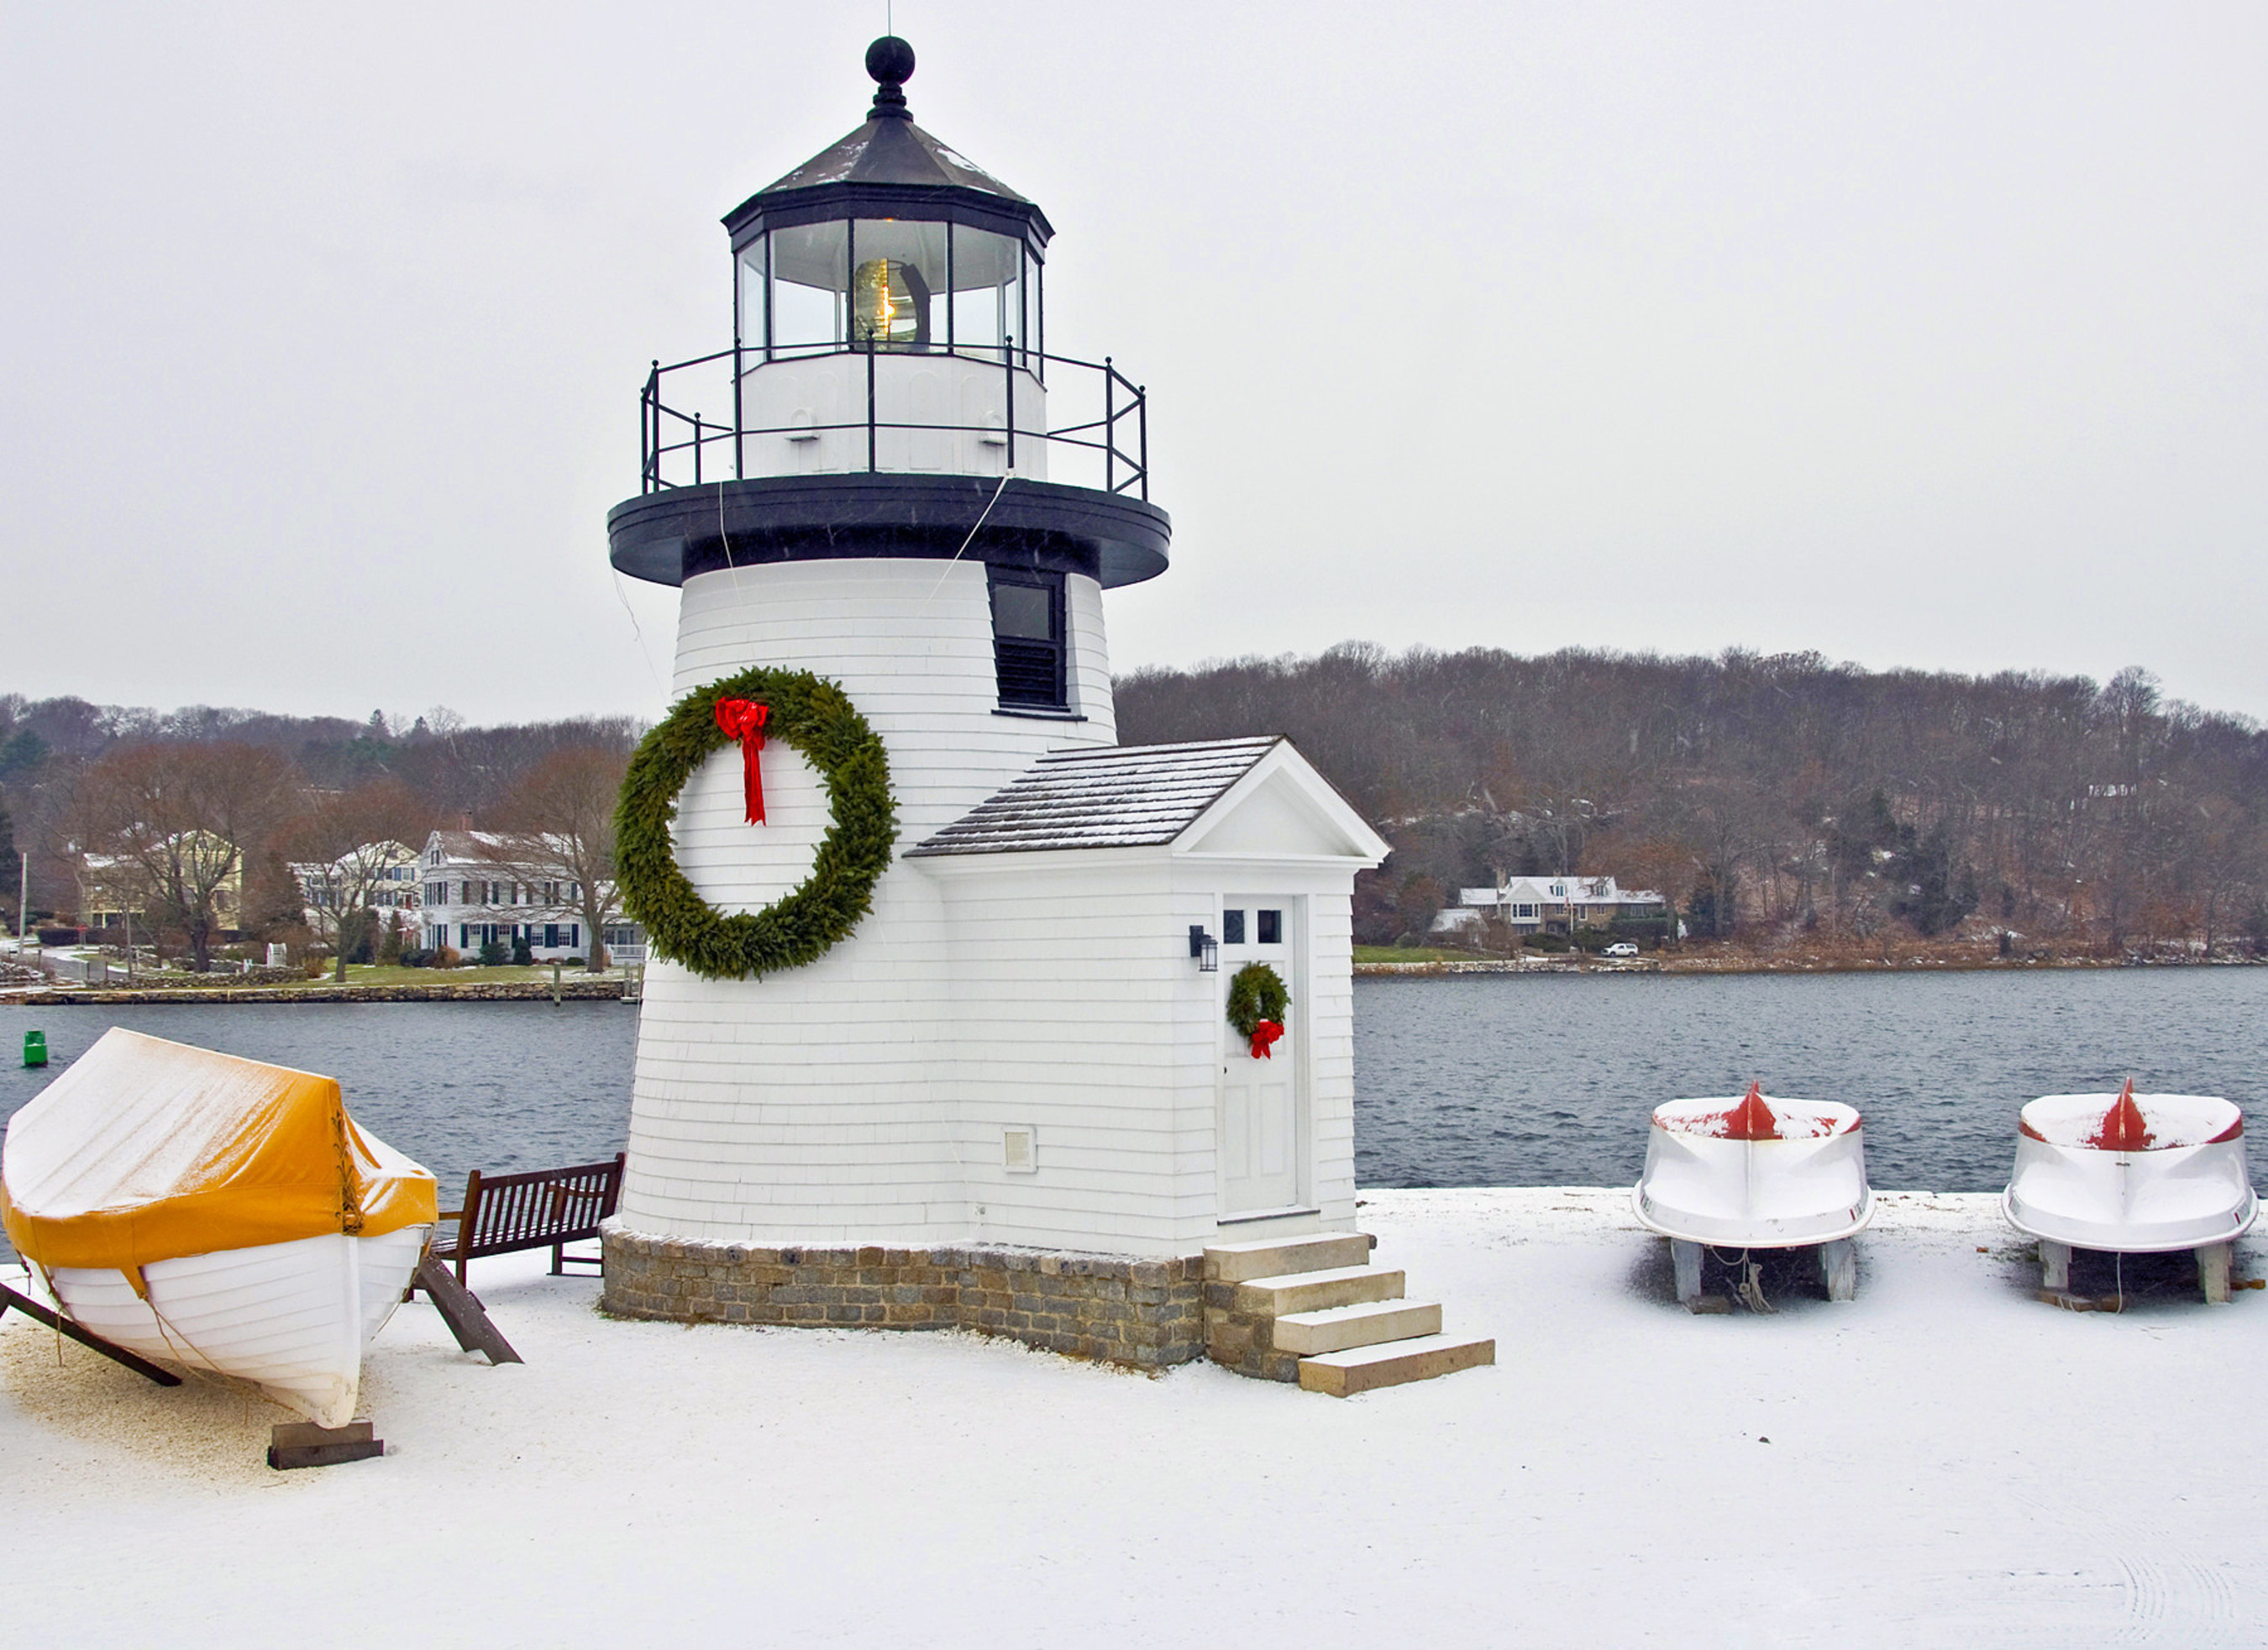 Discover More of What Makes Winter a Wonderful Season in Connecticut